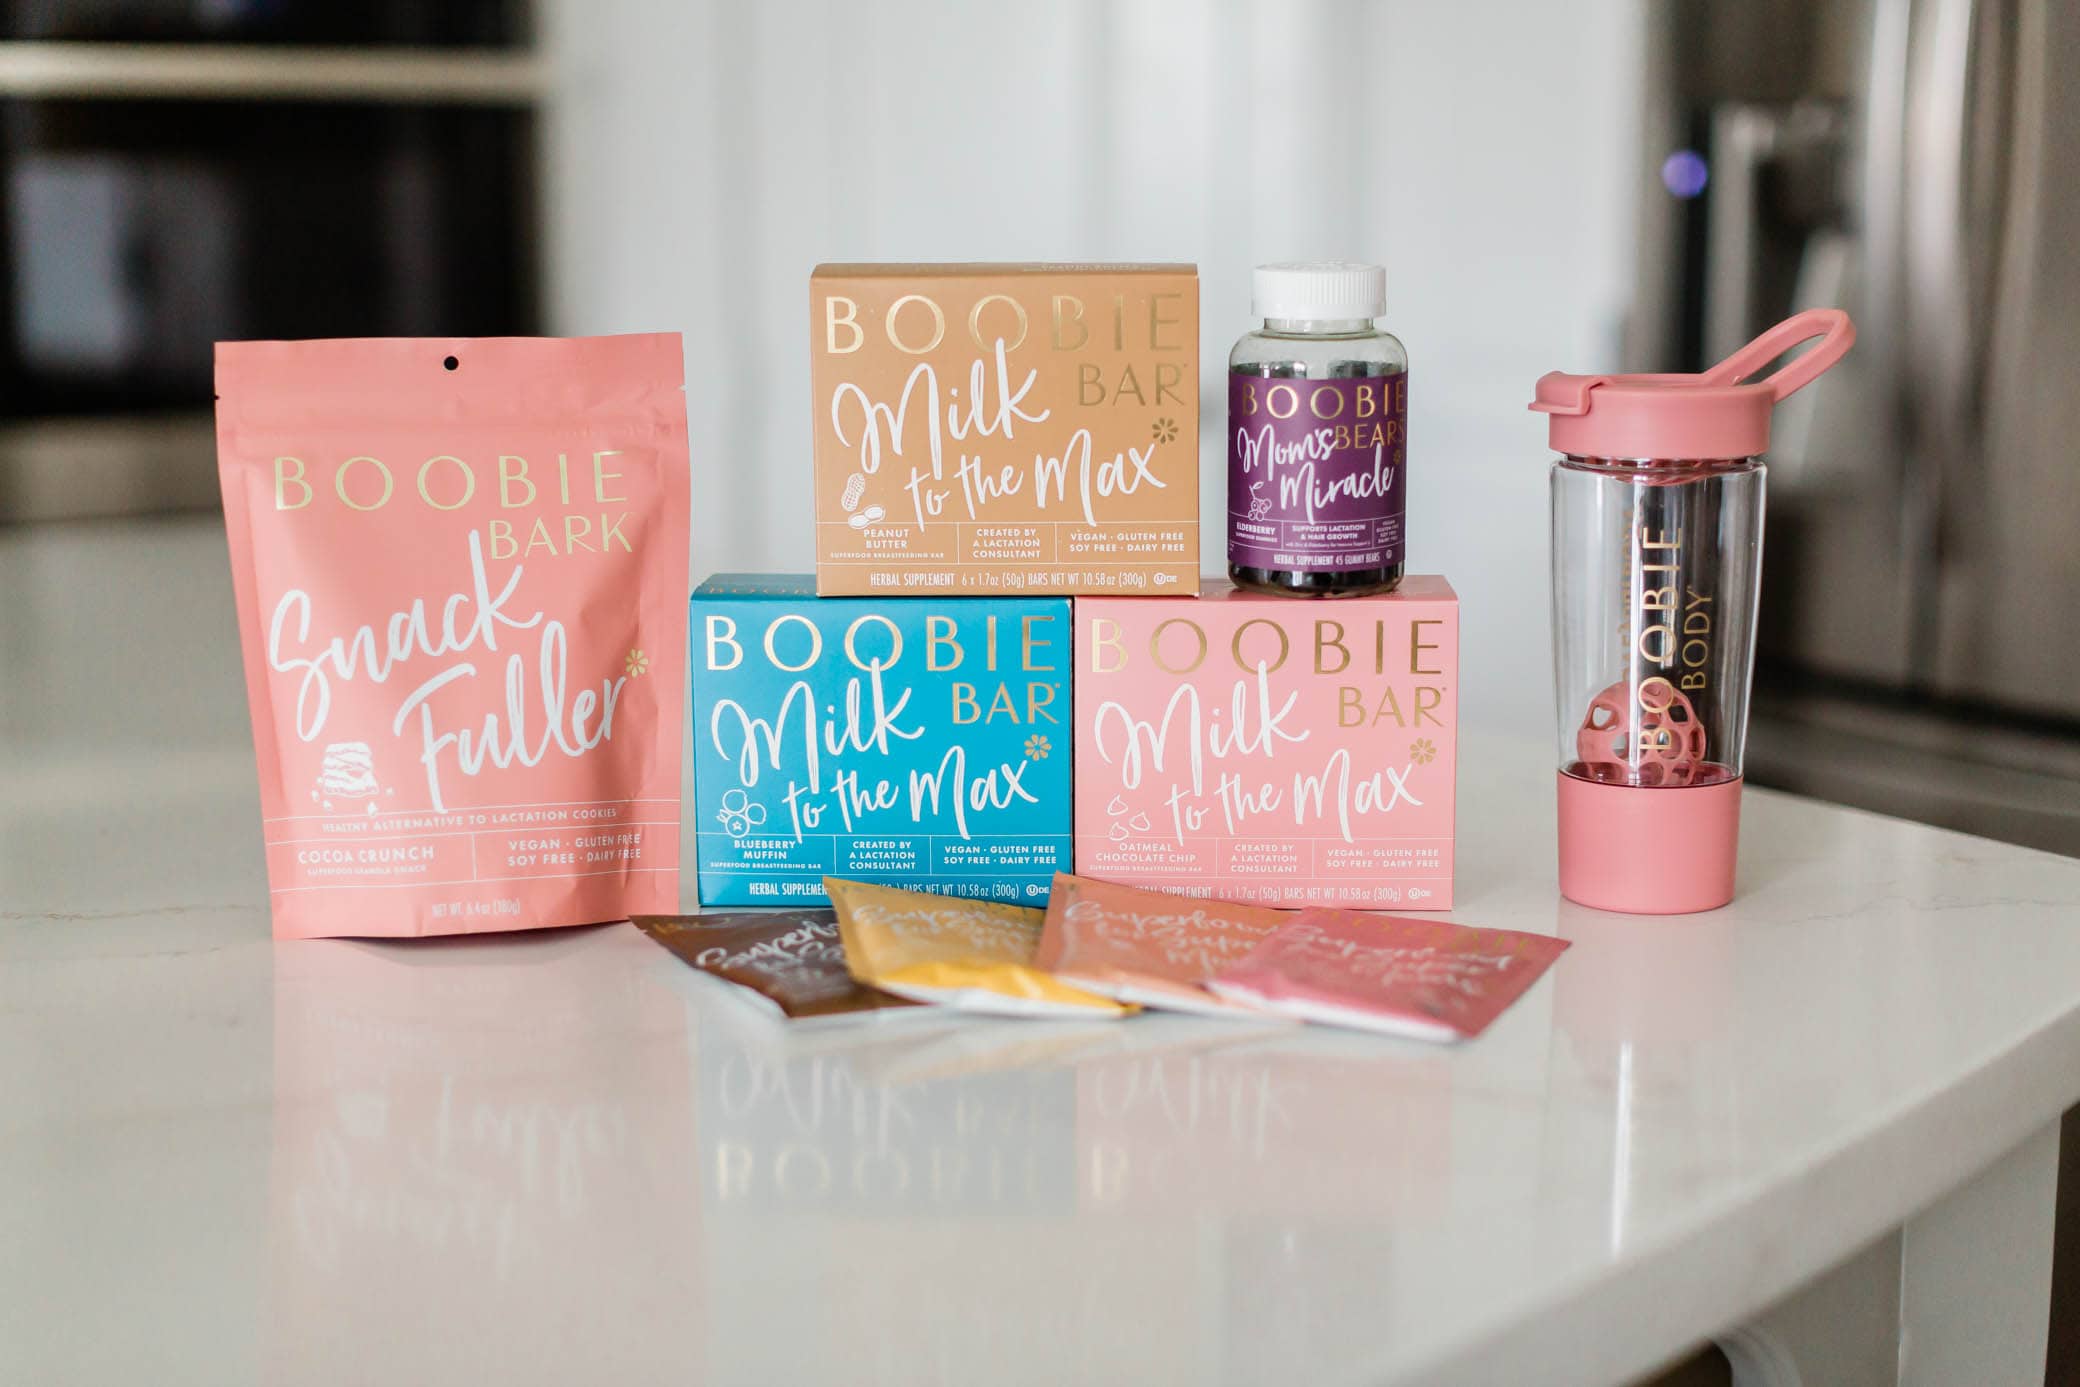 Boobie products sitting on a kitchen counter